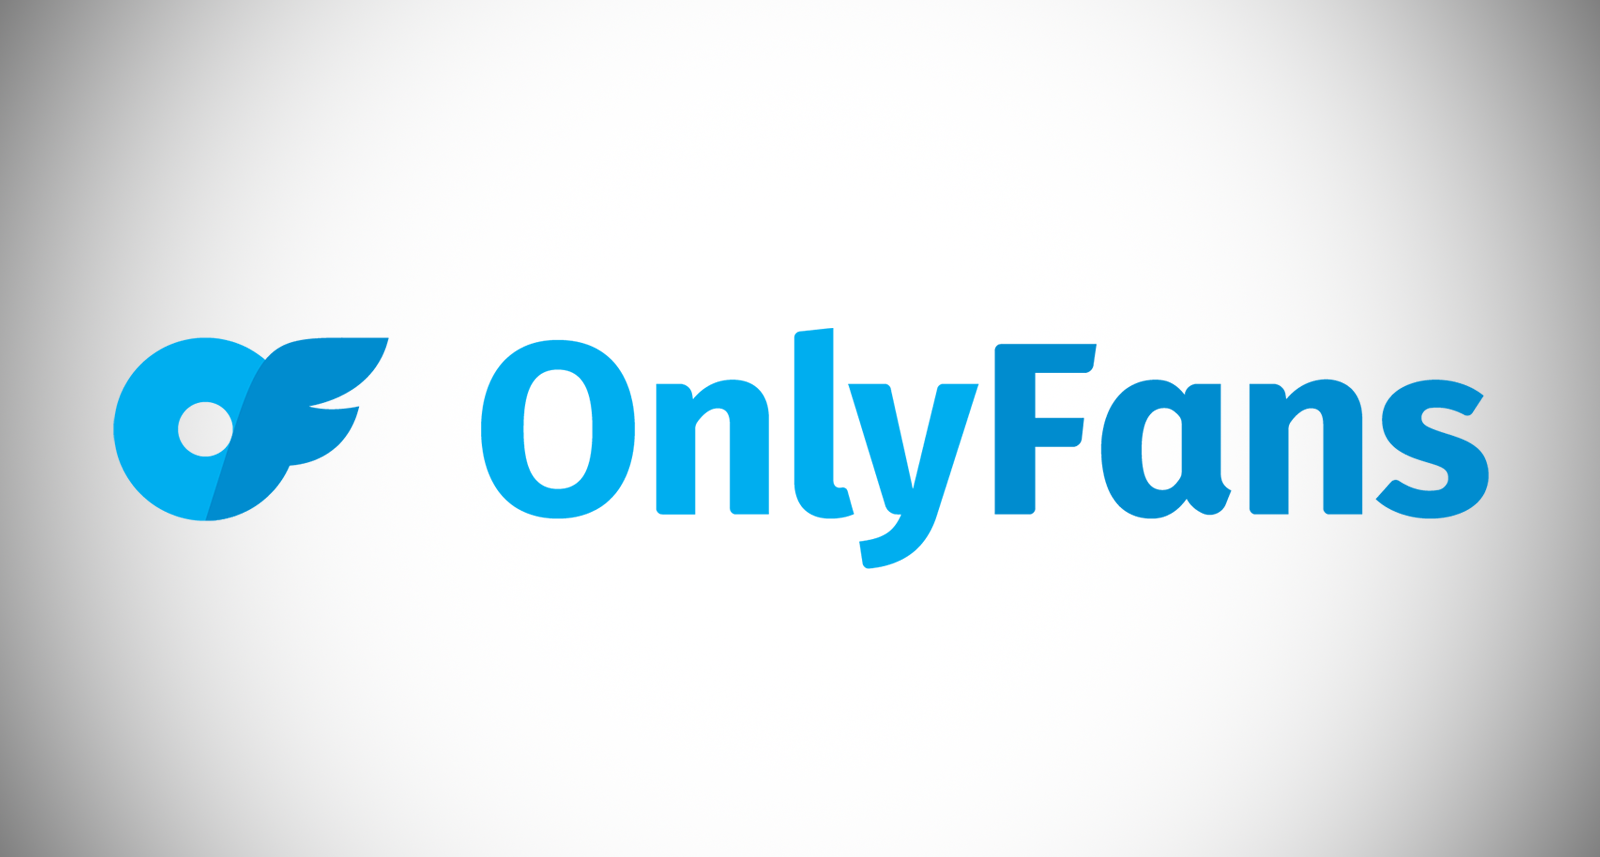 Only Onlyfans